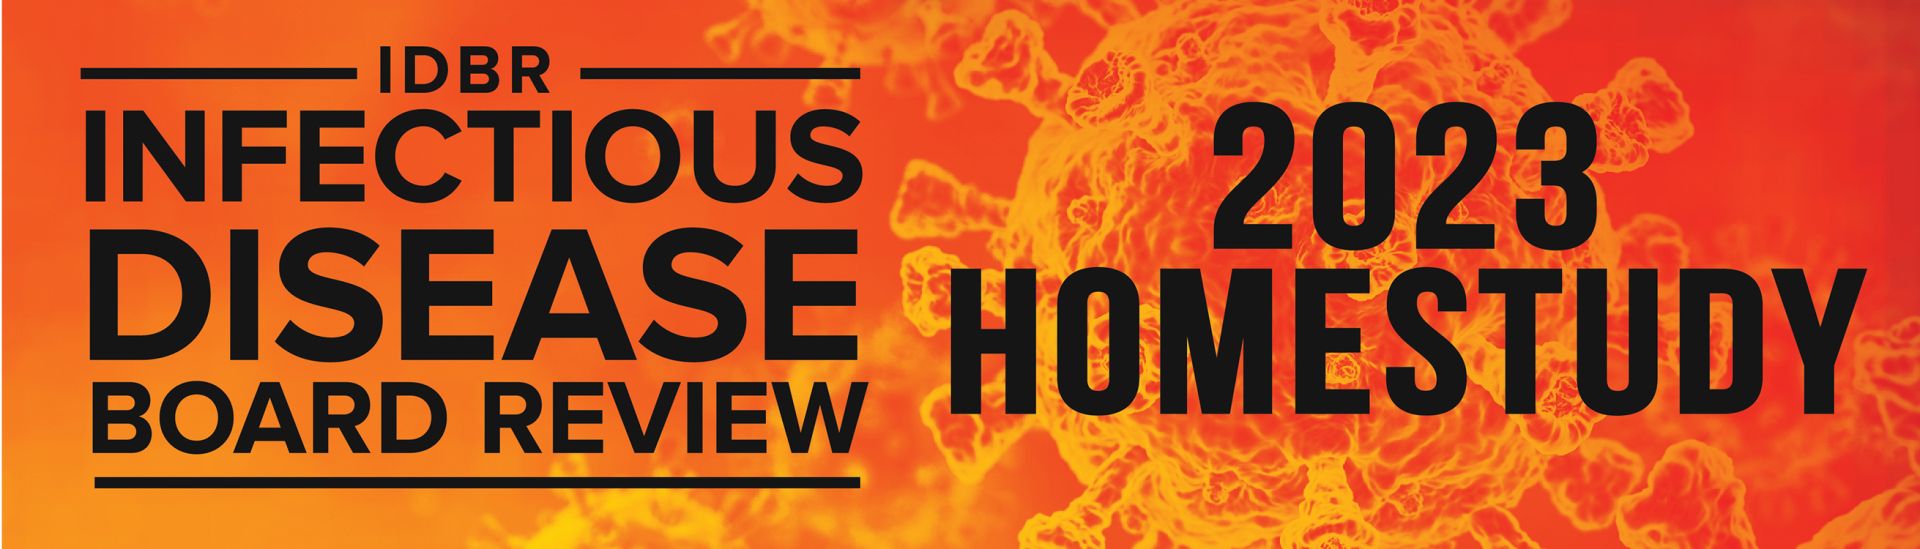 Infectious Disease Board Review 2023 HOMESTUDY